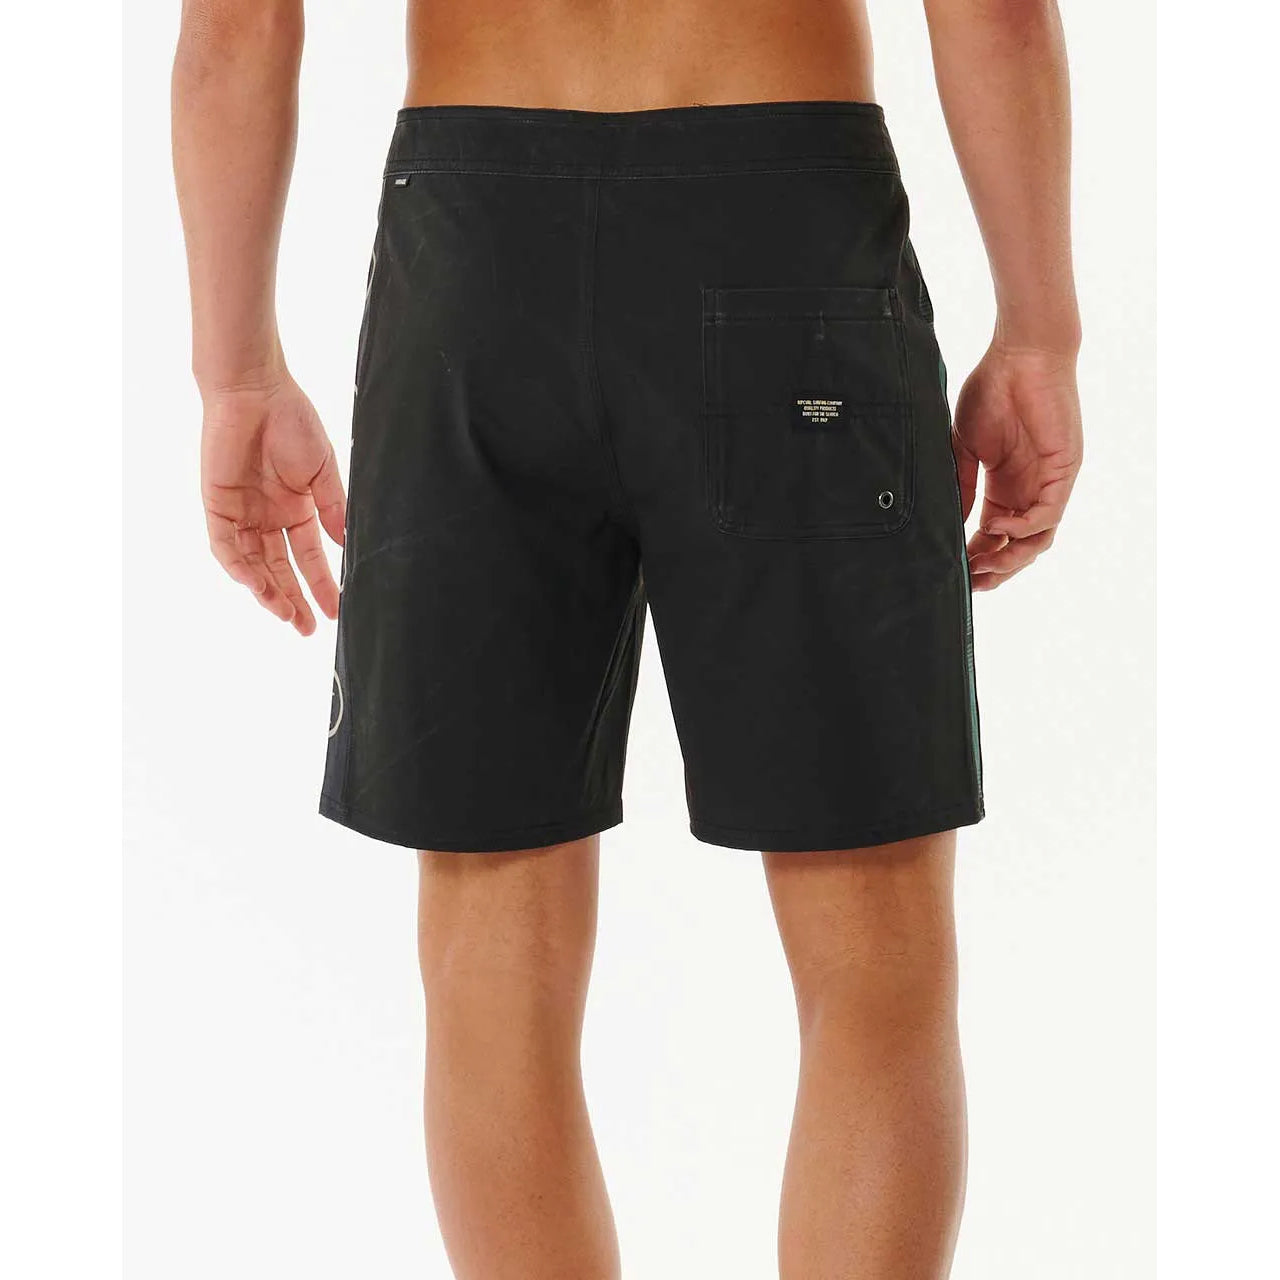 RIP CURL MIRAGE QUALITY SURF PRODUCTS 18" BOARDSHORTS